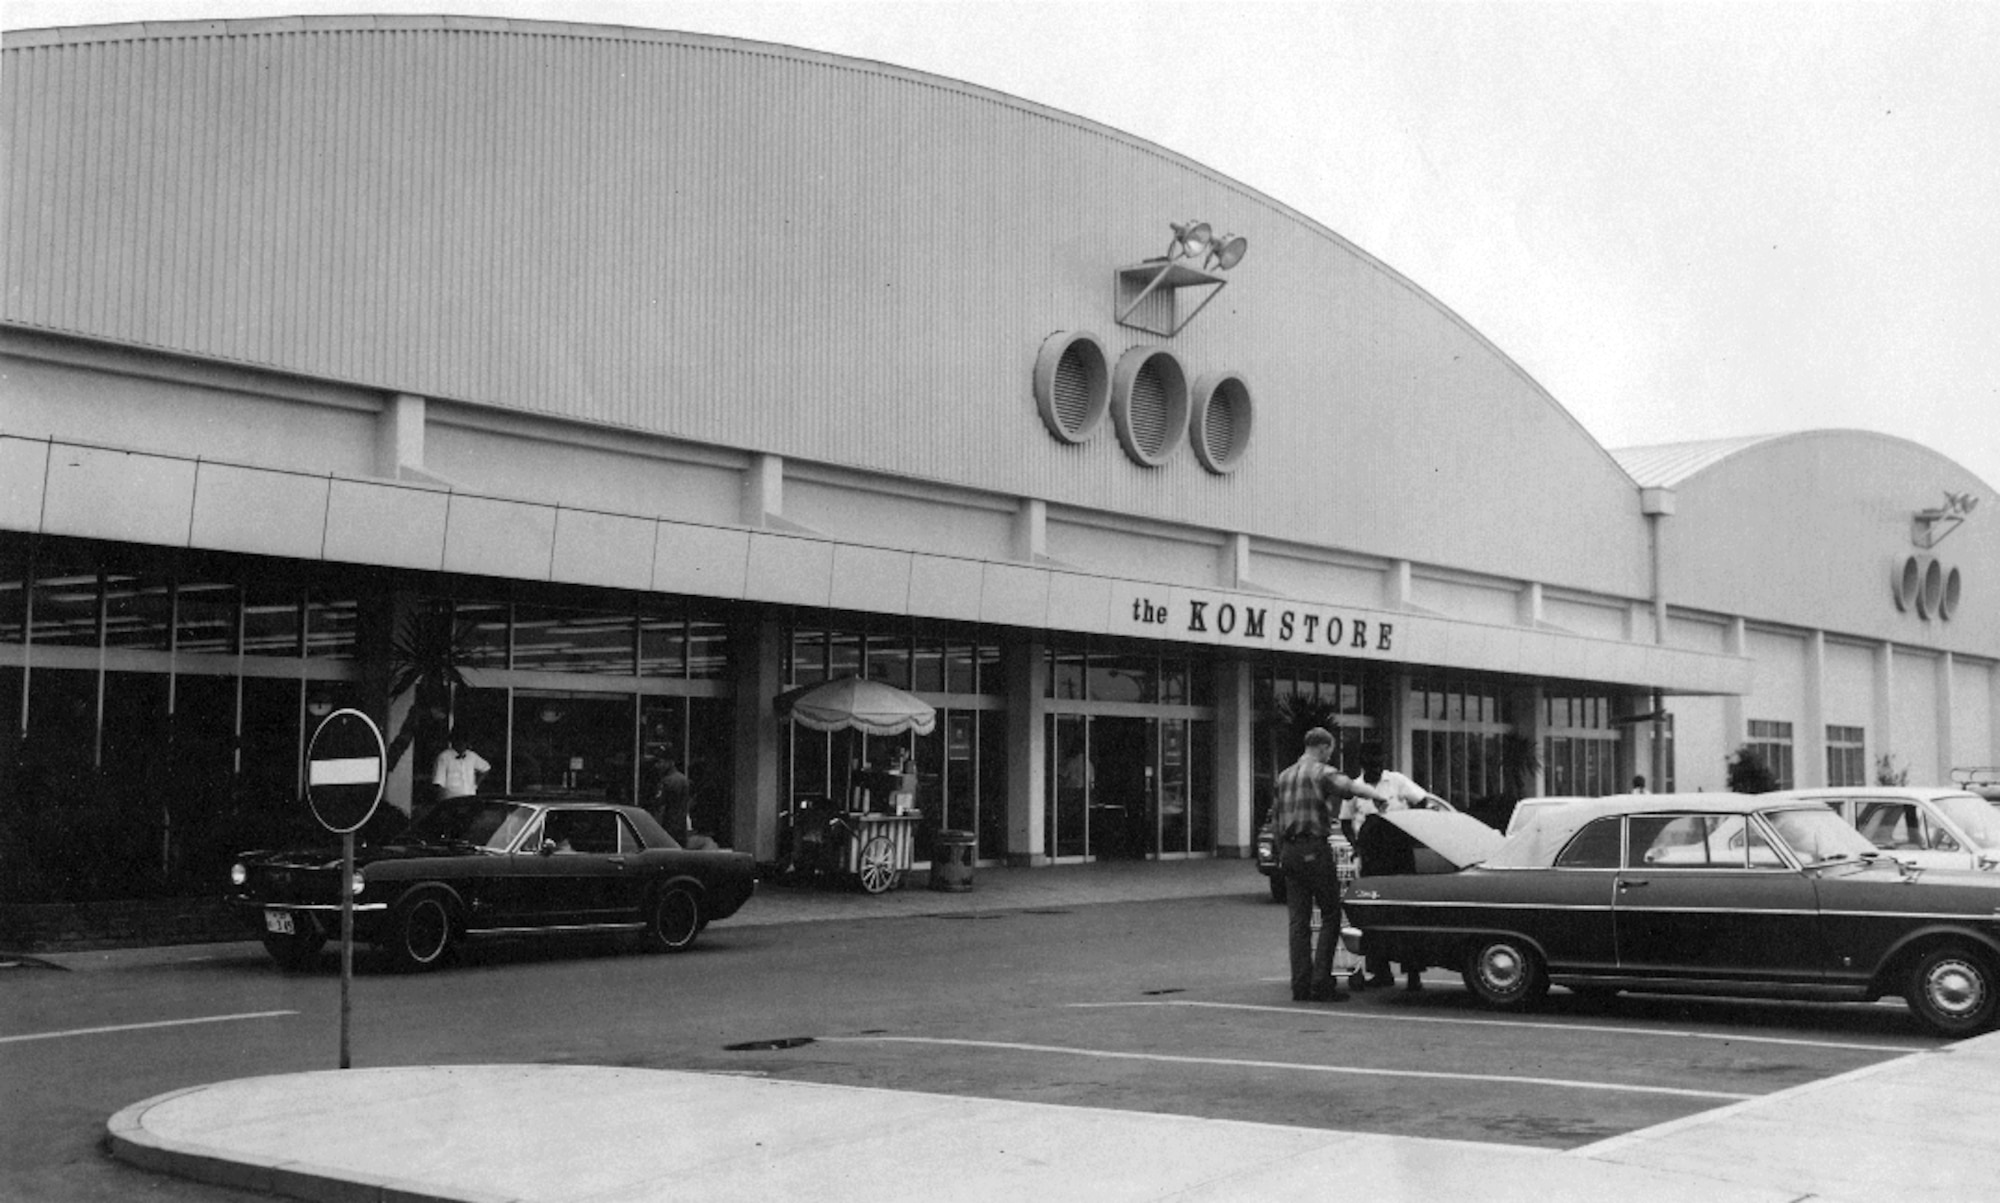 A 1970s photo of Yokota's BXtra building with its unmistakable portholes.
The building was originally constructed as a commissary, and was one of many
new facilities built during the early 1970s under KPCP. At that time it was
called the "Komstore”. (Photo courtesy of the 374th 
Airlift Wing History Office)